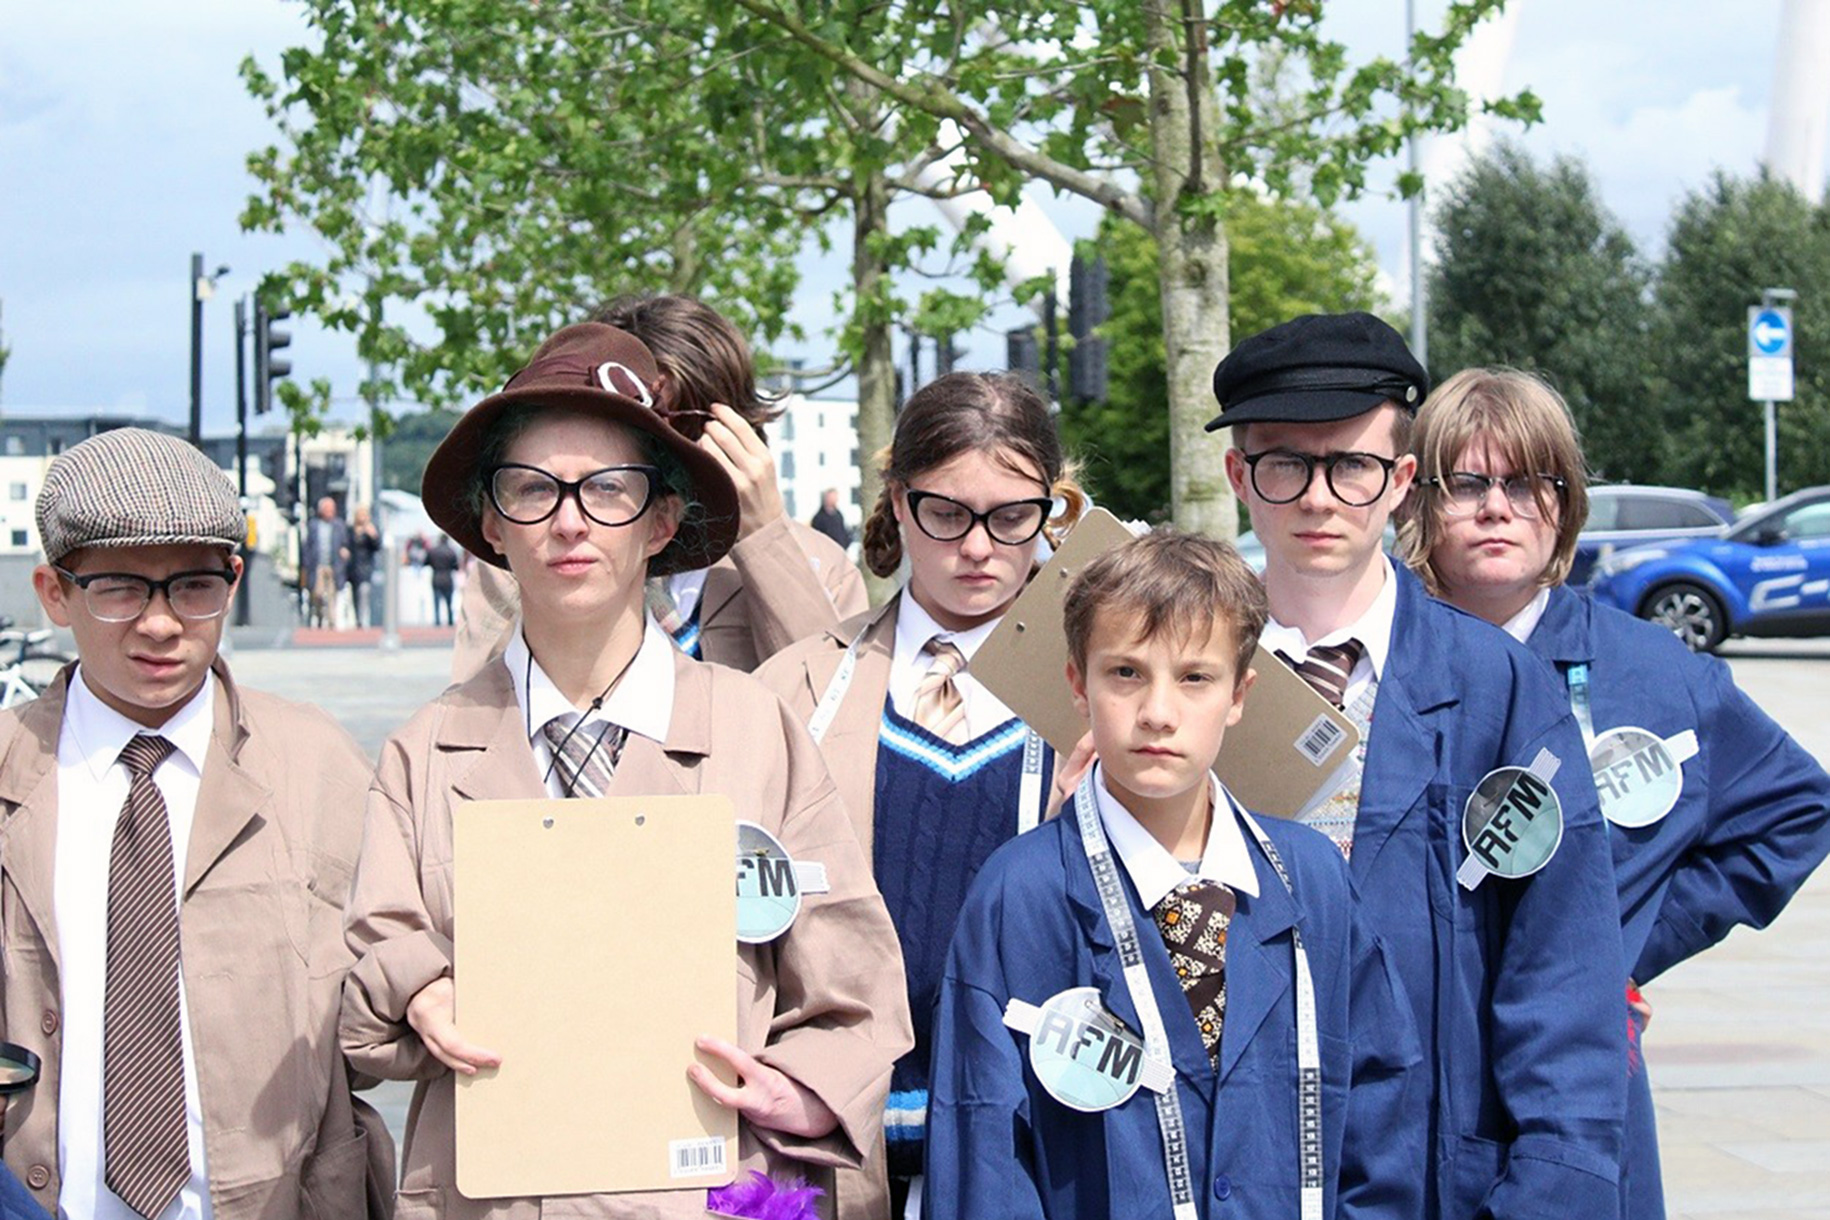 Junior members of the Anti Fun ministry out and about in Newport, wearing regulation brown and blue coats, carrying clipboards